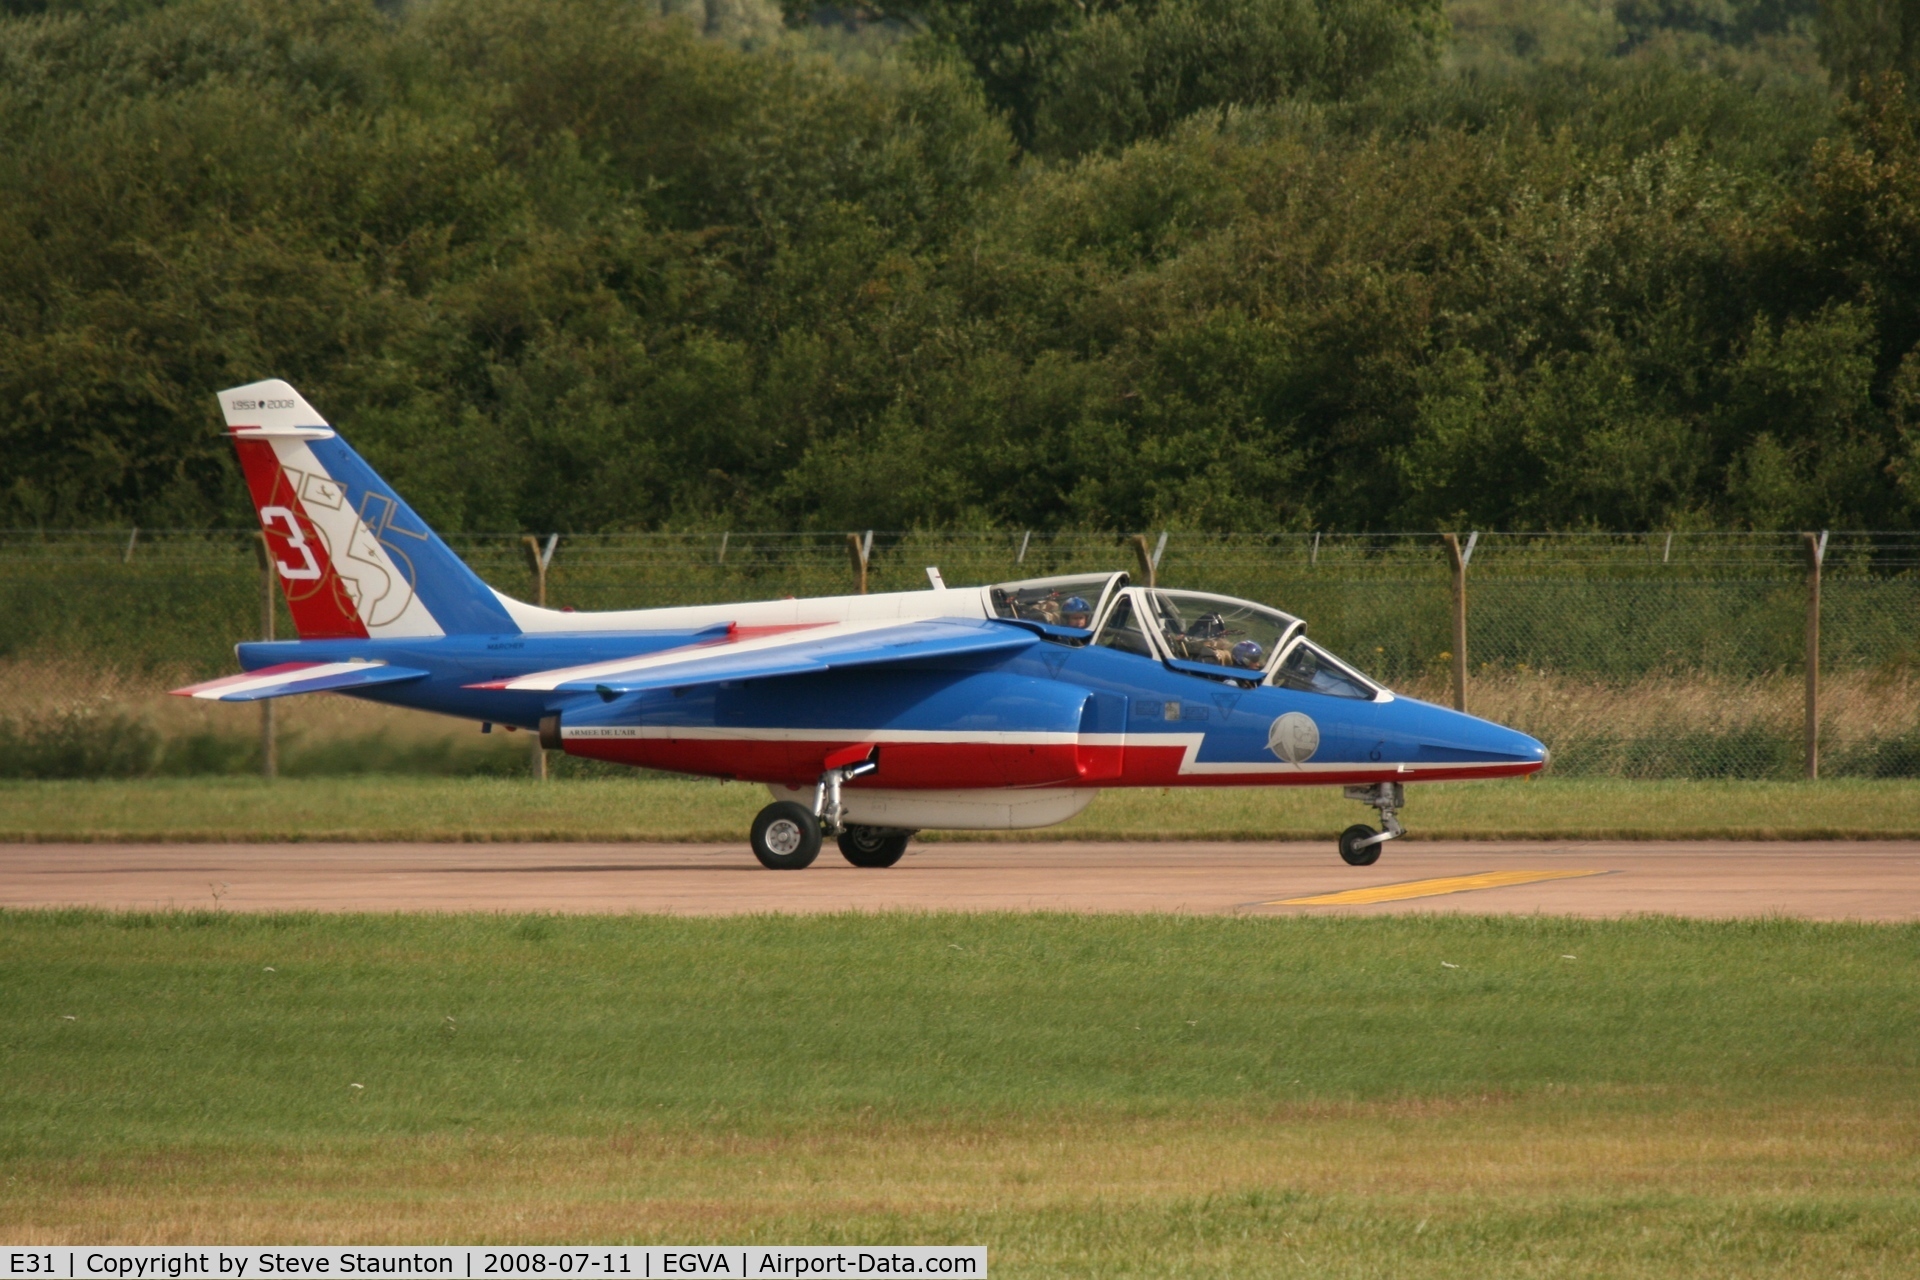 E31, Dassault-Dornier Alpha Jet E C/N E31, Taken at the Royal International Air Tattoo 2008 during arrivals and departures (show days cancelled due to bad weather)